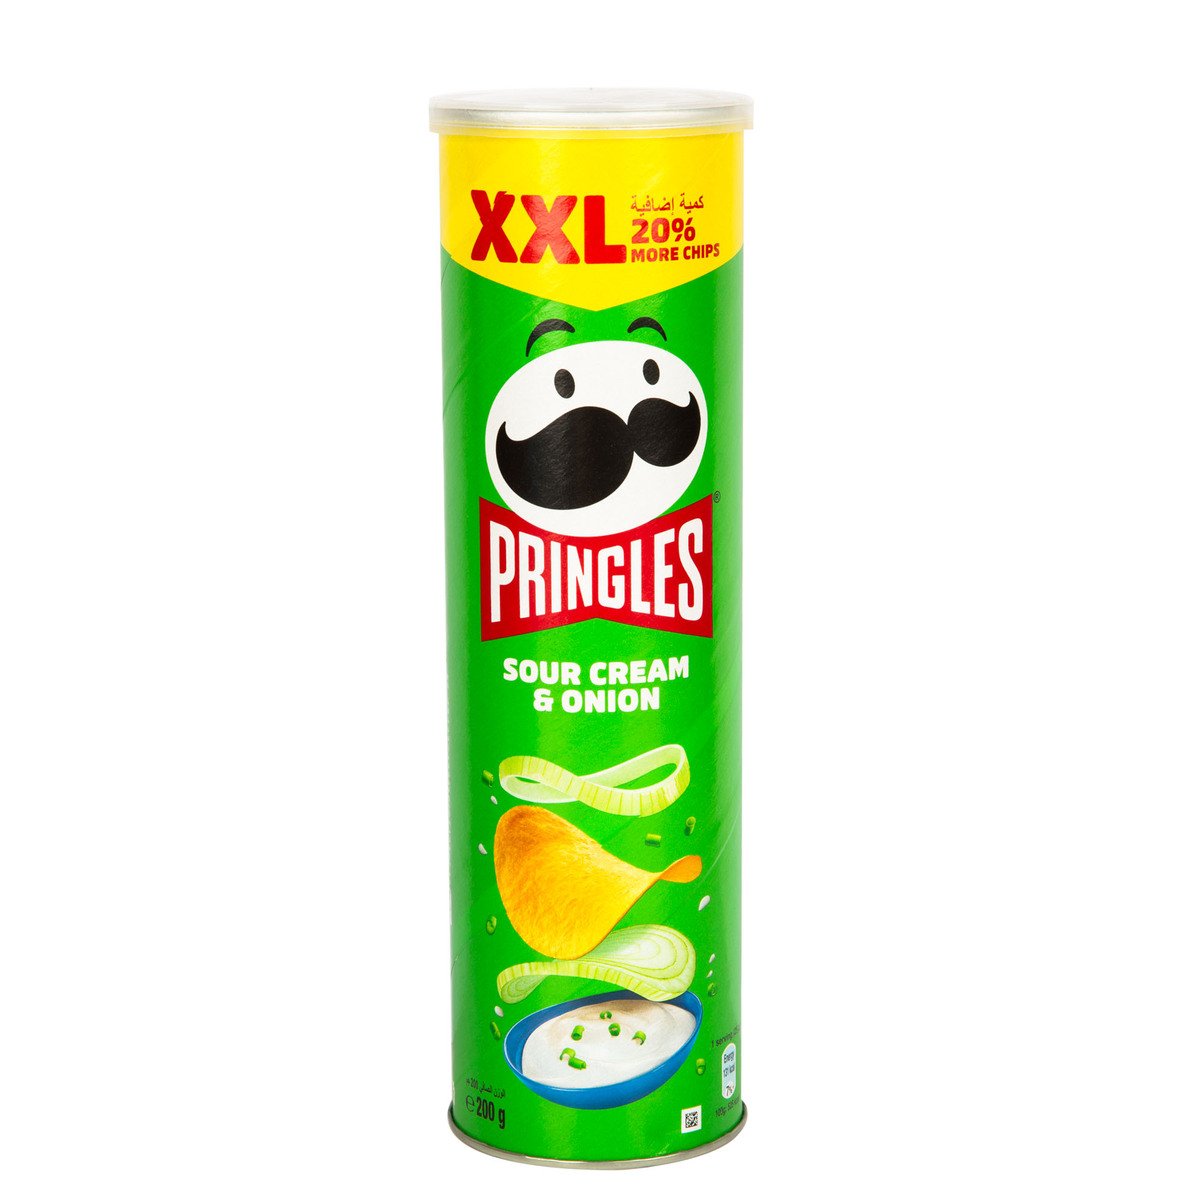 Pringles XXL Sour Cream And Onion Flavoured Chips 200g